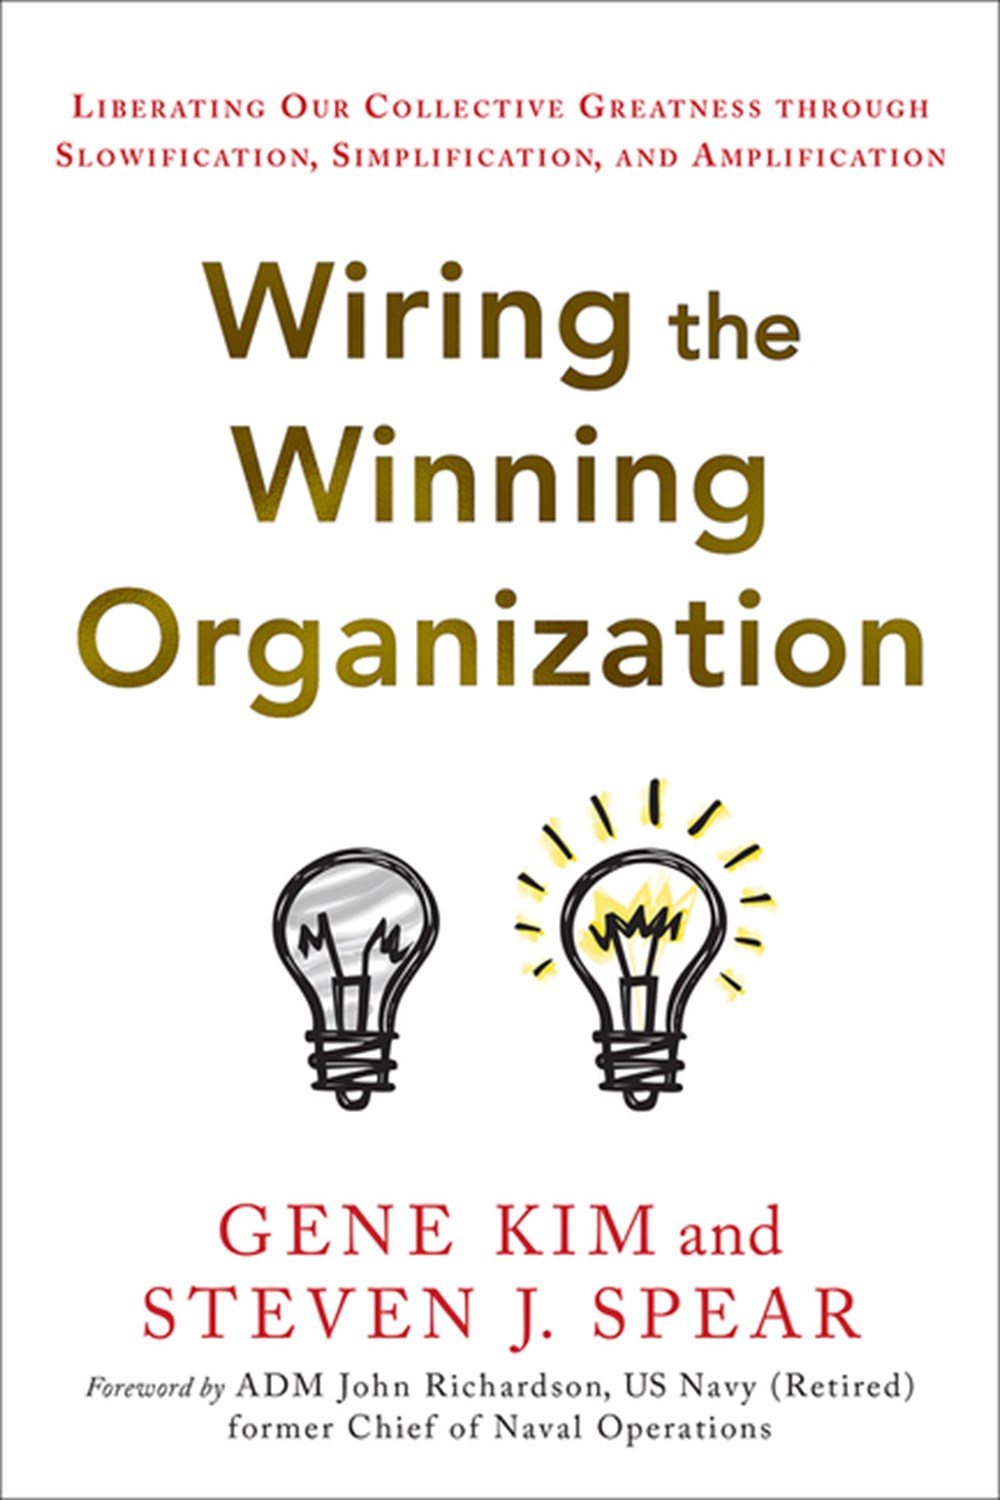 Wiring the Winning Organization: Liberating Our Collective Greatness Through Slowification, Simplifi